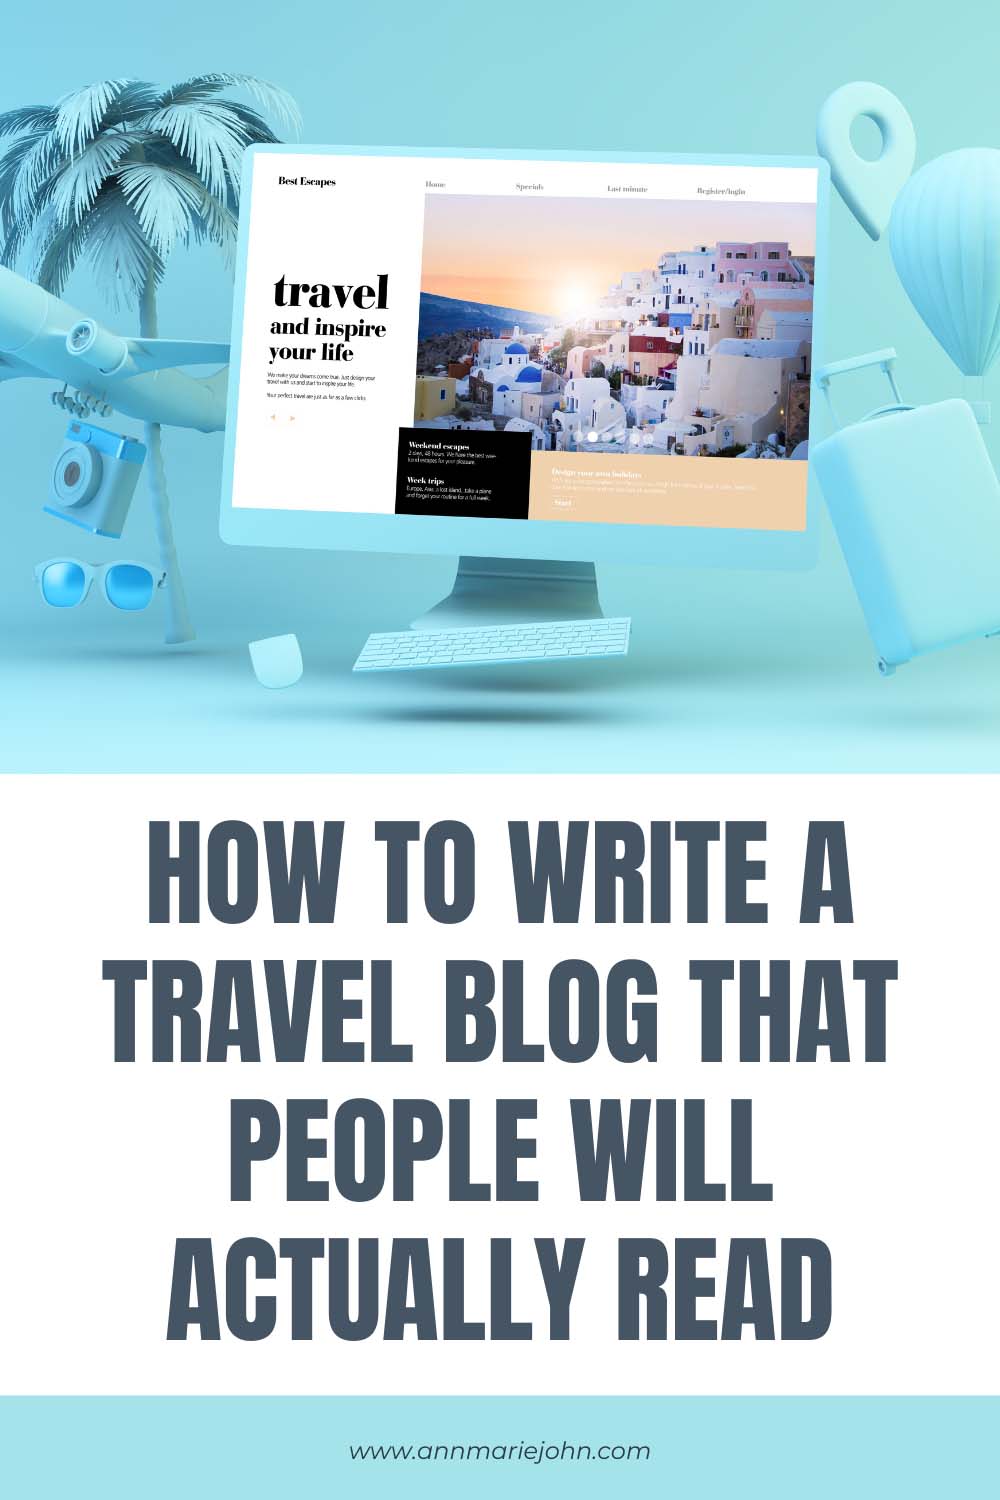 How to Write a Travel Blog That People Will Actually Read